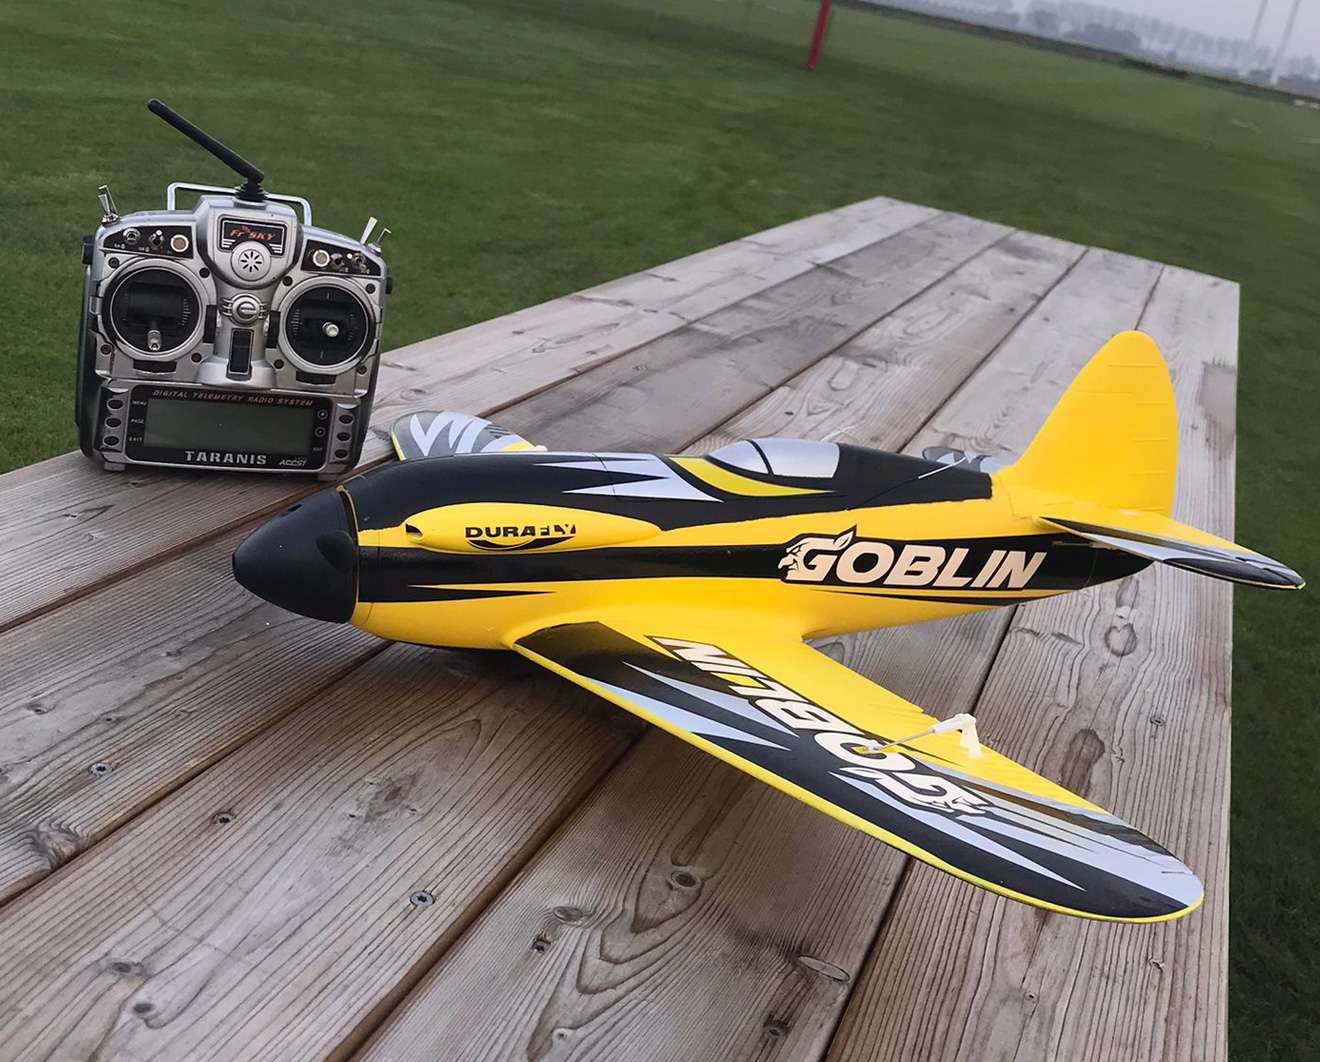 Flight Review and Assembly Tips - Durafly Goblin Racer